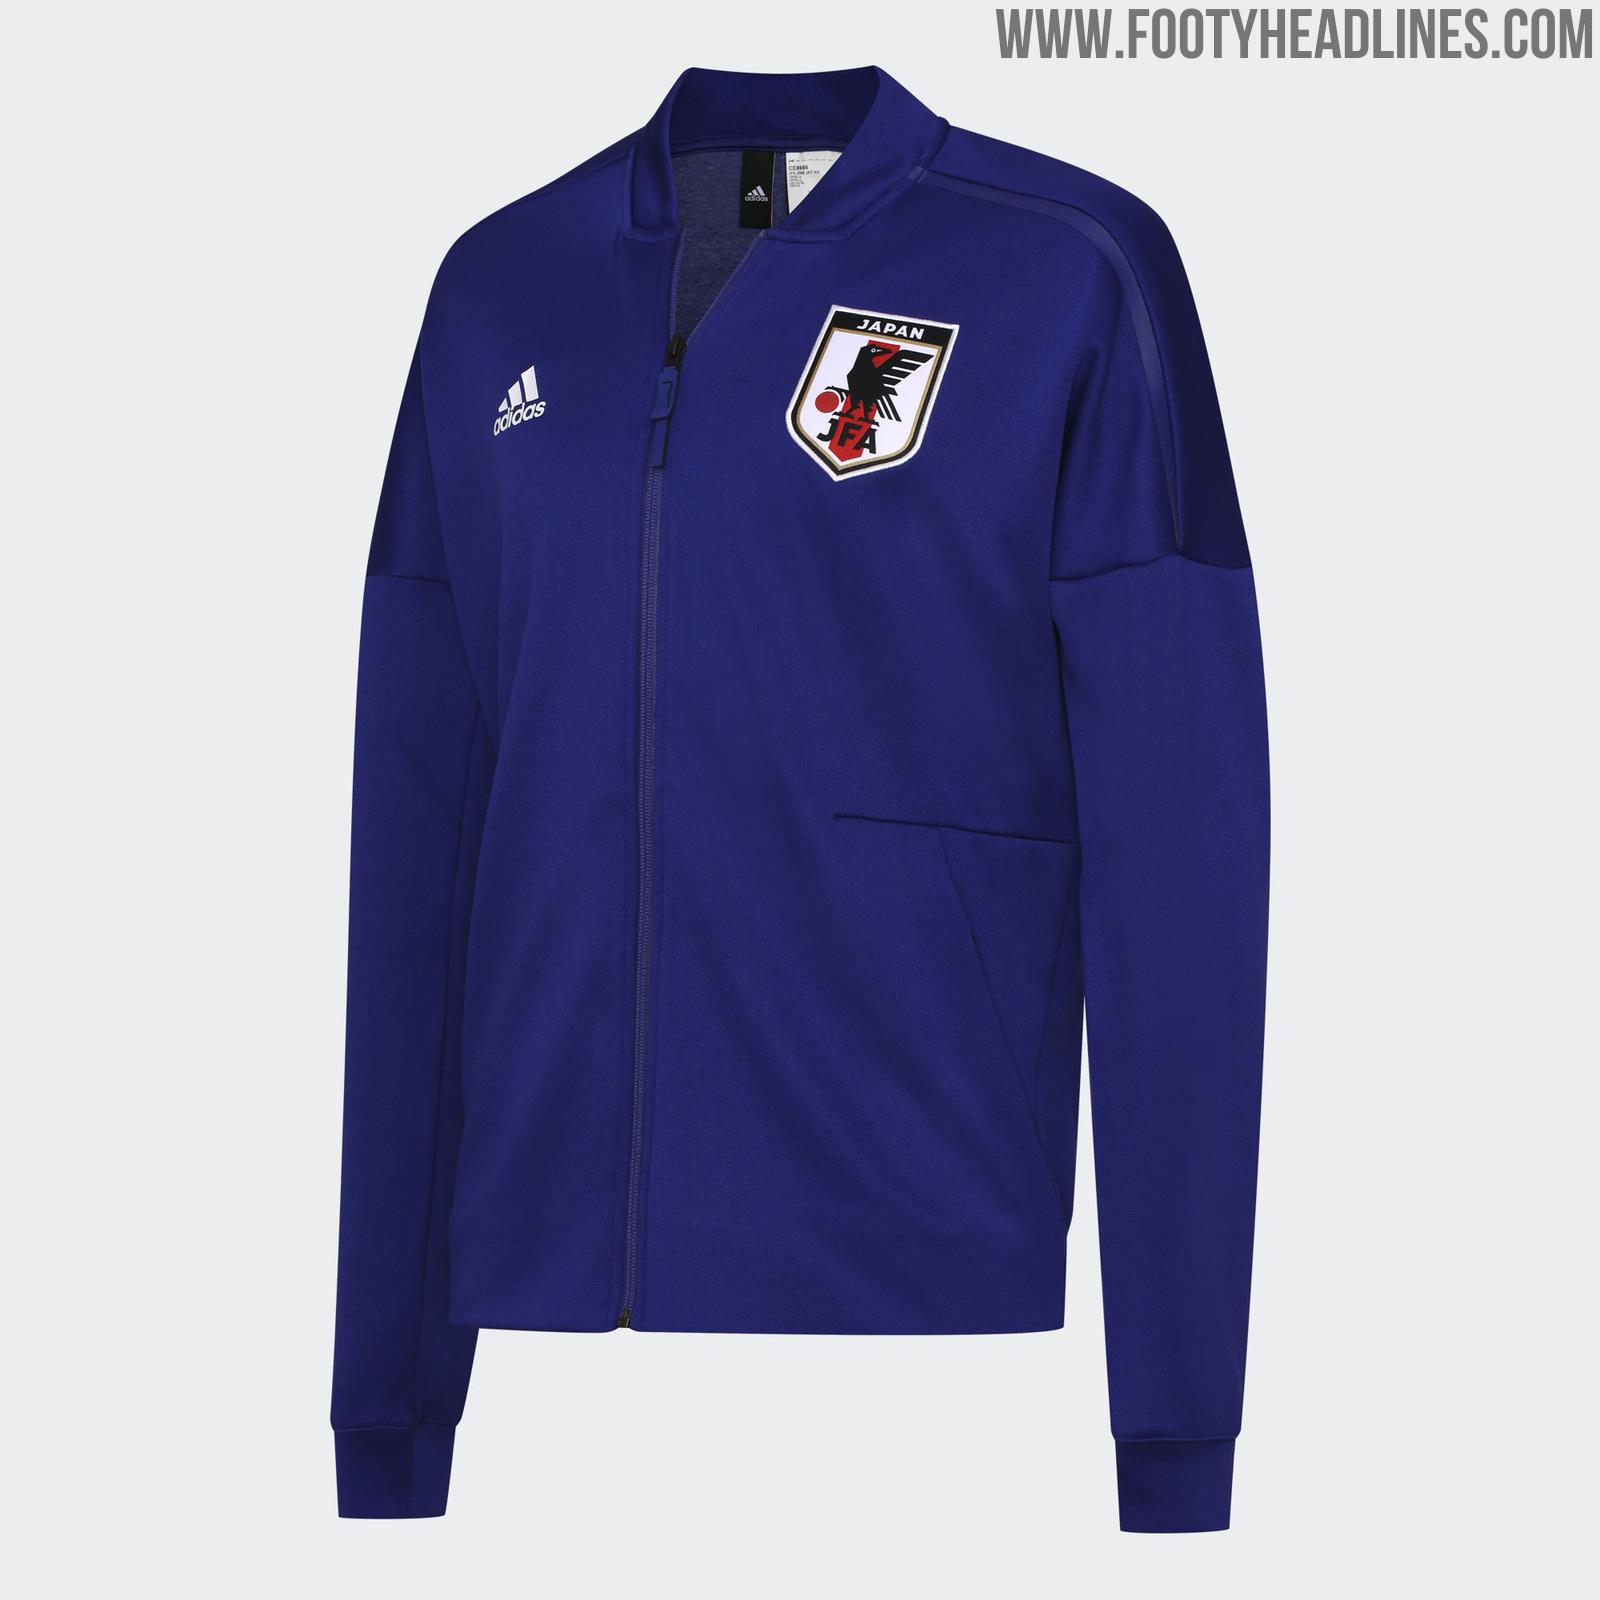 Adidas Germany, Spain, Argentina, Japan, Mexico, Colombia, Sweden and ...